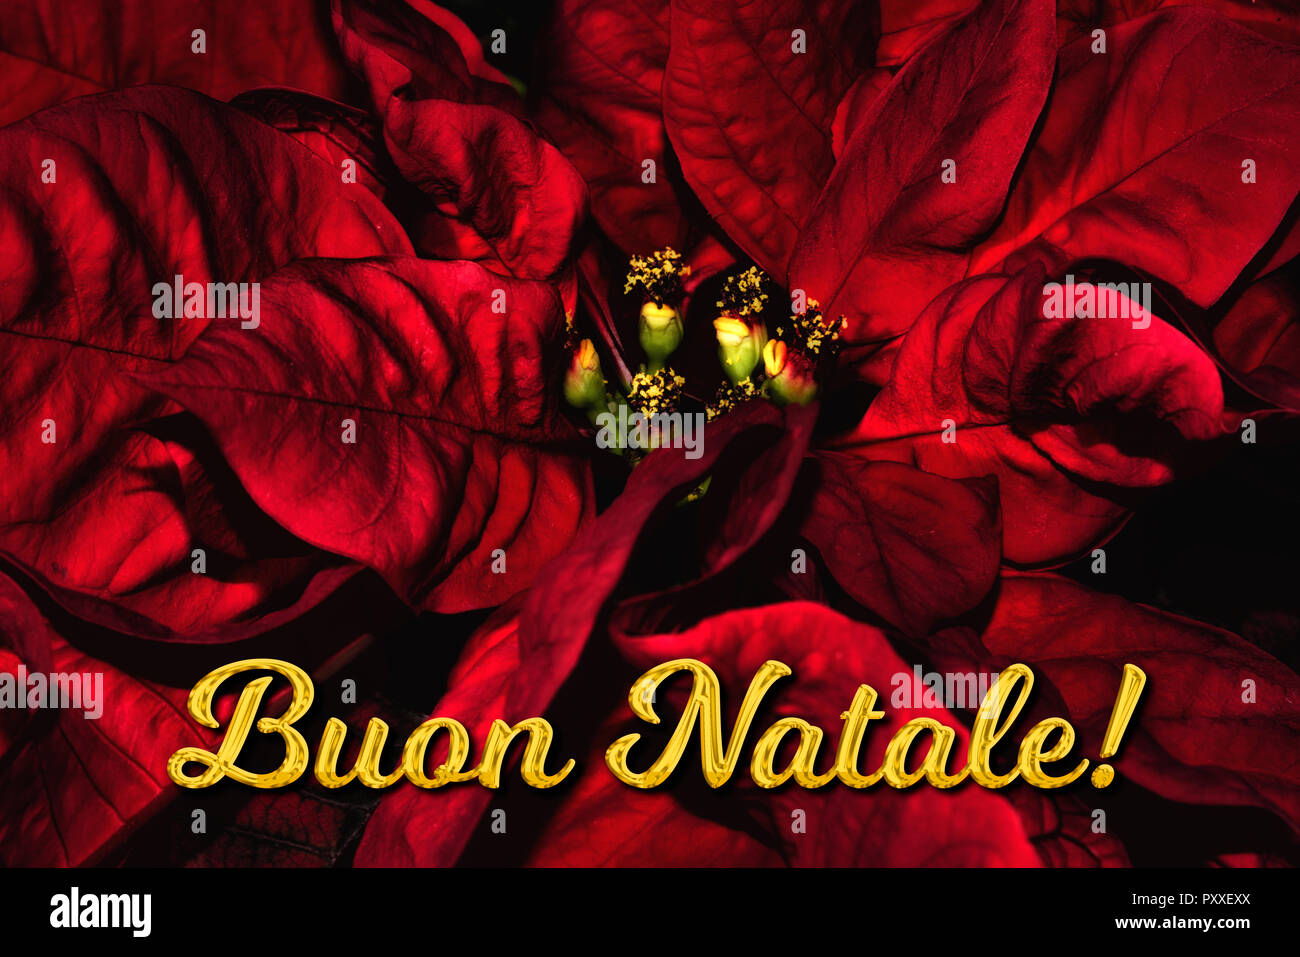 Buon Natale Greetings Italian.The Italian Text Buon Natale Means Merry Christmas Which Is In Front Of A Red Poinsettia The Perfect Holiday Season Greetings Card Stock Photo Alamy